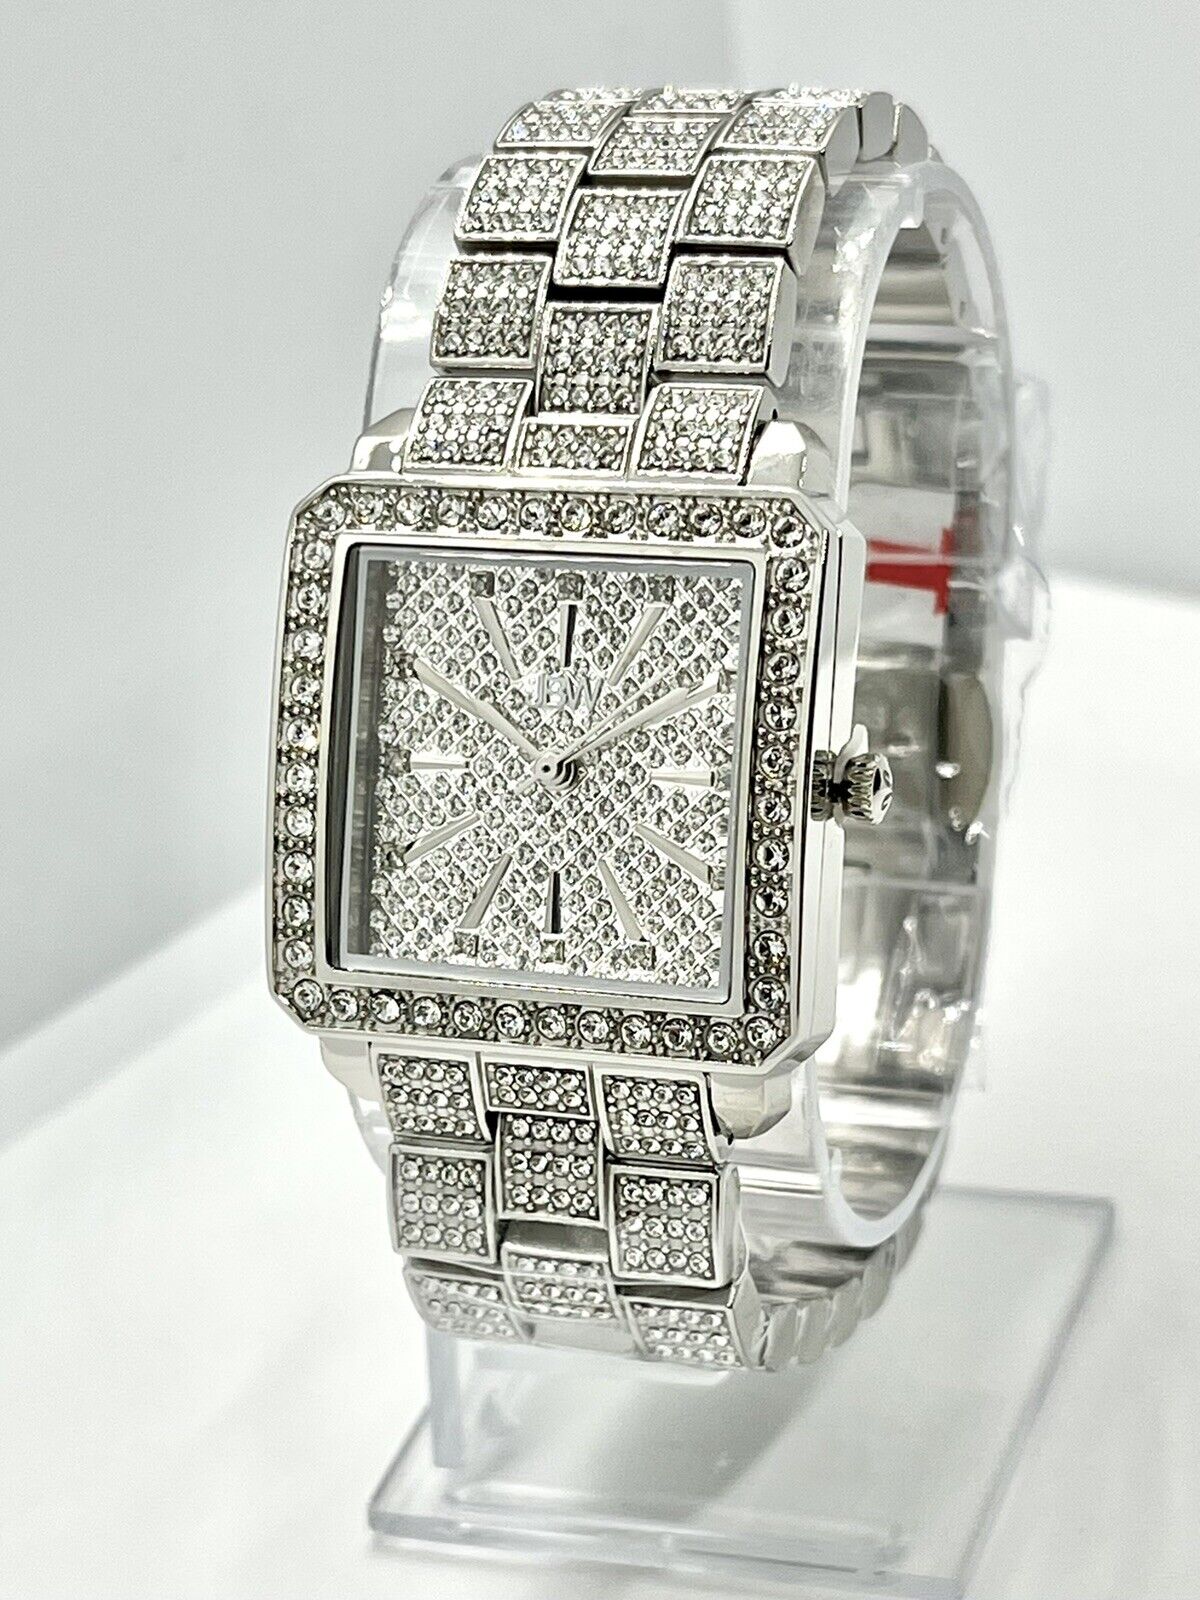 JBW Women’s Cristal All Silver Crystals Square 27mm Stainless Steel Watch J6386C